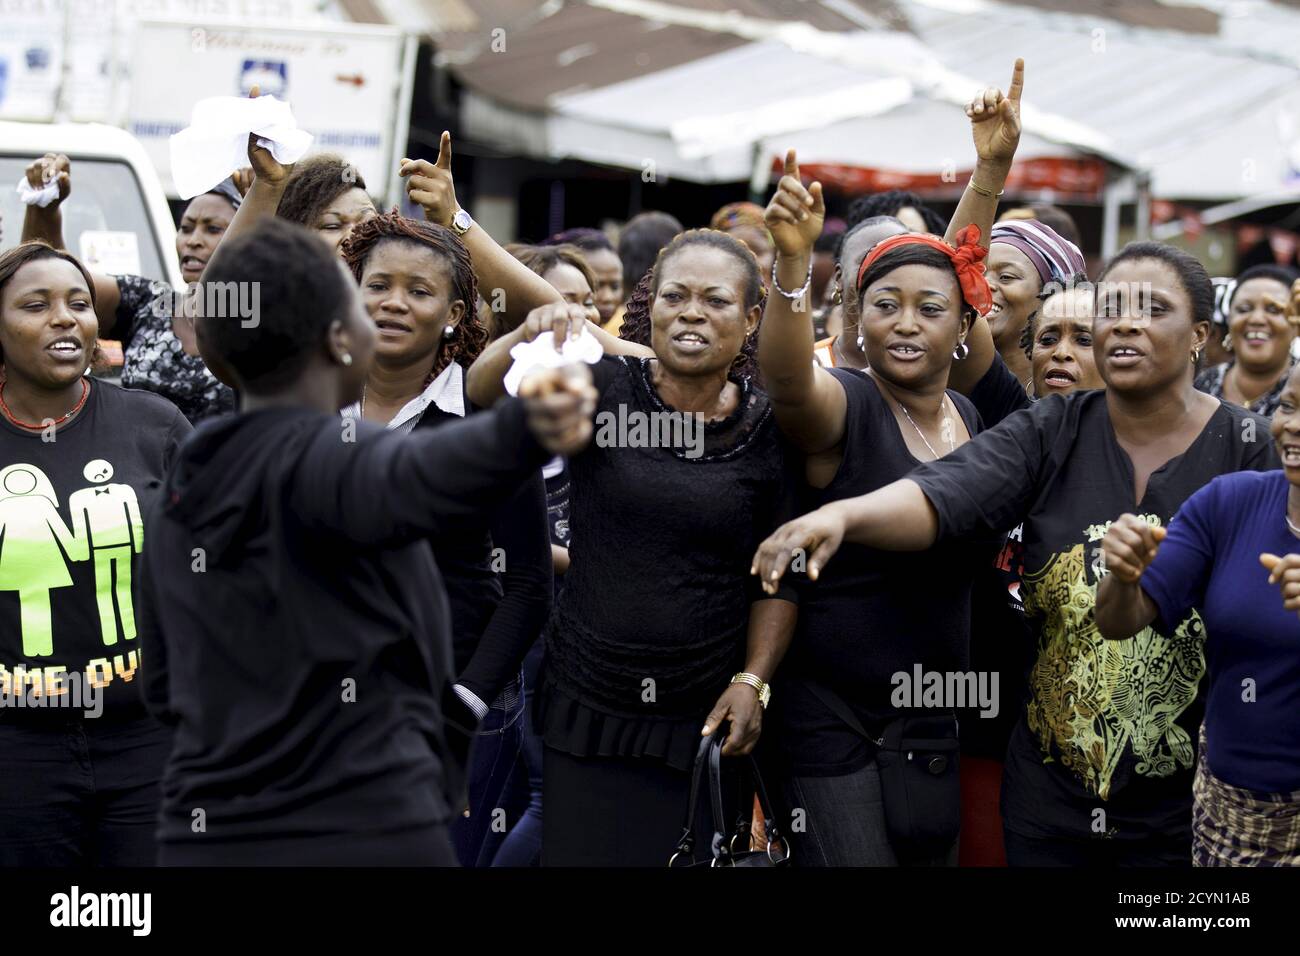 Women from communities in Rivers state protest against irregularities in voting in the weekend's election, at Port Harcourt March 30, 2015. The head of Nigeria's election commission admitted on Sunday he was concerned about allegations of irregularities in voting in this weekend's election in southern, oil producing Rivers state, where hundreds of opposition supporters have been protesting.   REUTERS/Afolabi Sotunde Stock Photo